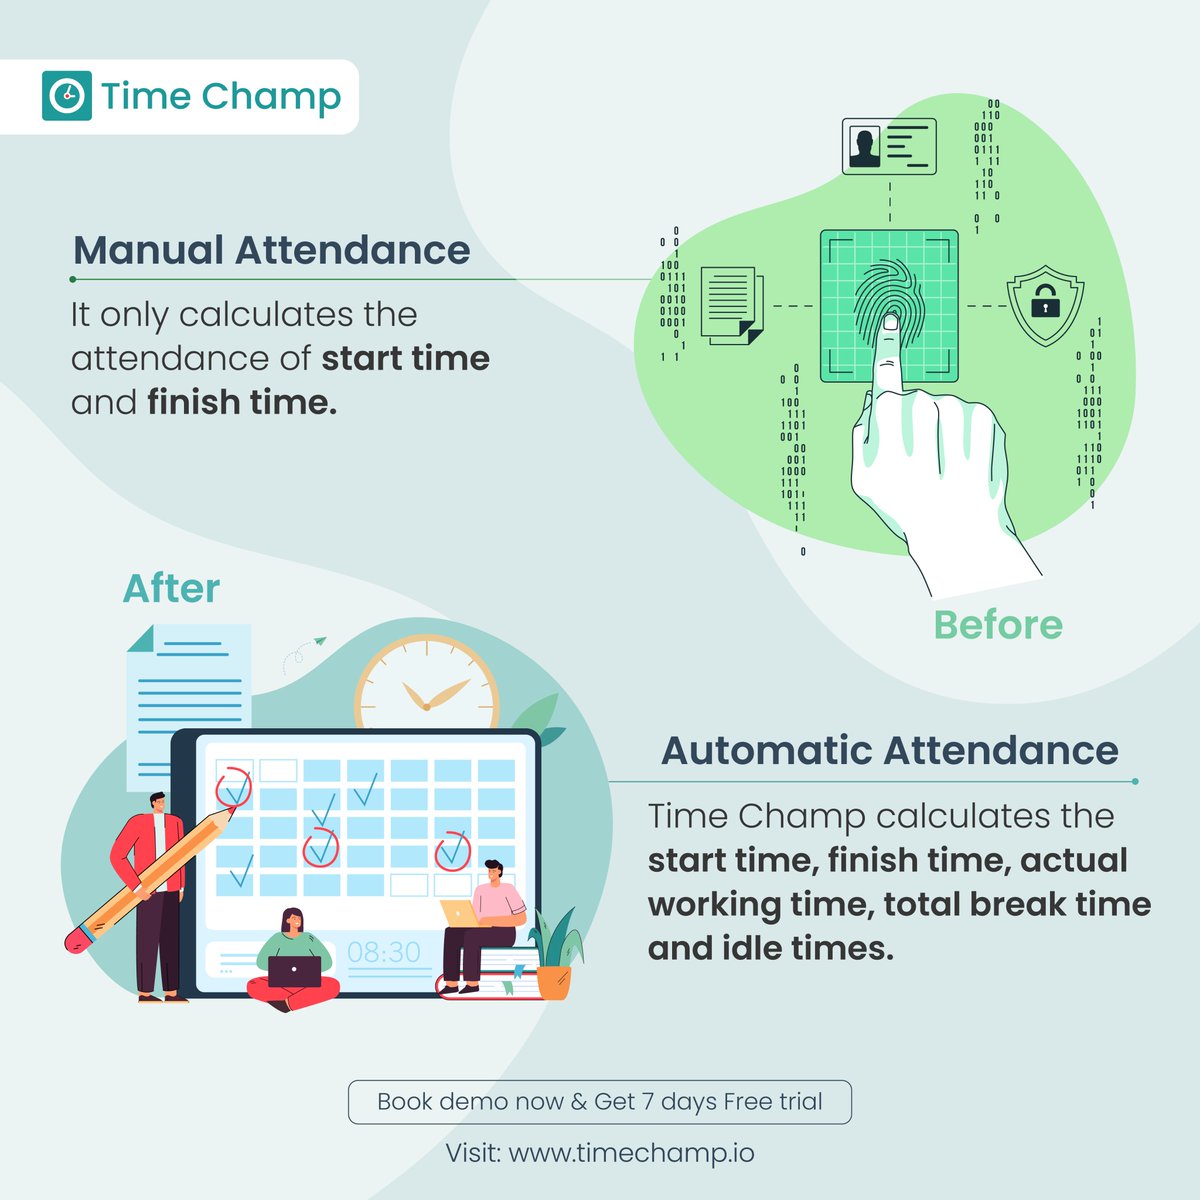 Upgrade your time-tracking game! Time Champ revolutionizes attendance by shifting from manual logging to automated precision.
ry Time Champ for free: bit.ly/3pcDNE8

#SmartAttendance #AttendanceMadeEasy #AutomaticTracking #WorkSmart #BoostYourProductivity #TimeChamp